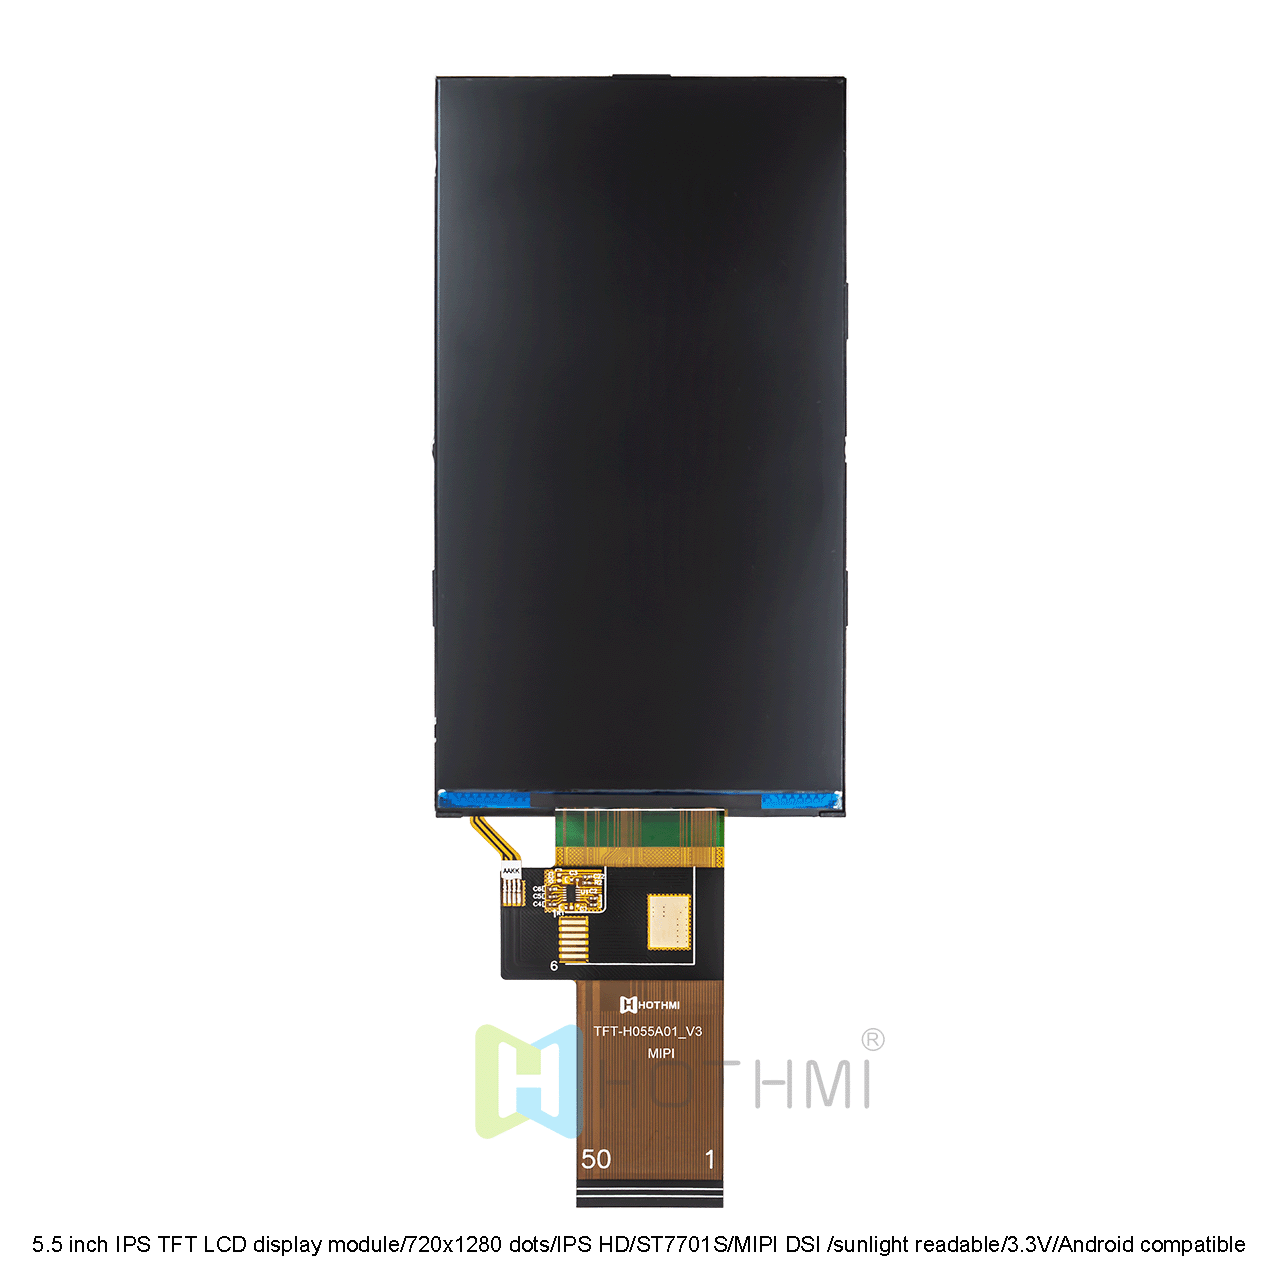 5.5 inch IPS TFT LCD display module/720x1280 dots/IPS HD/ST7701S/MIPI DSI interface/sunlight readable/3.3V/Android compatible